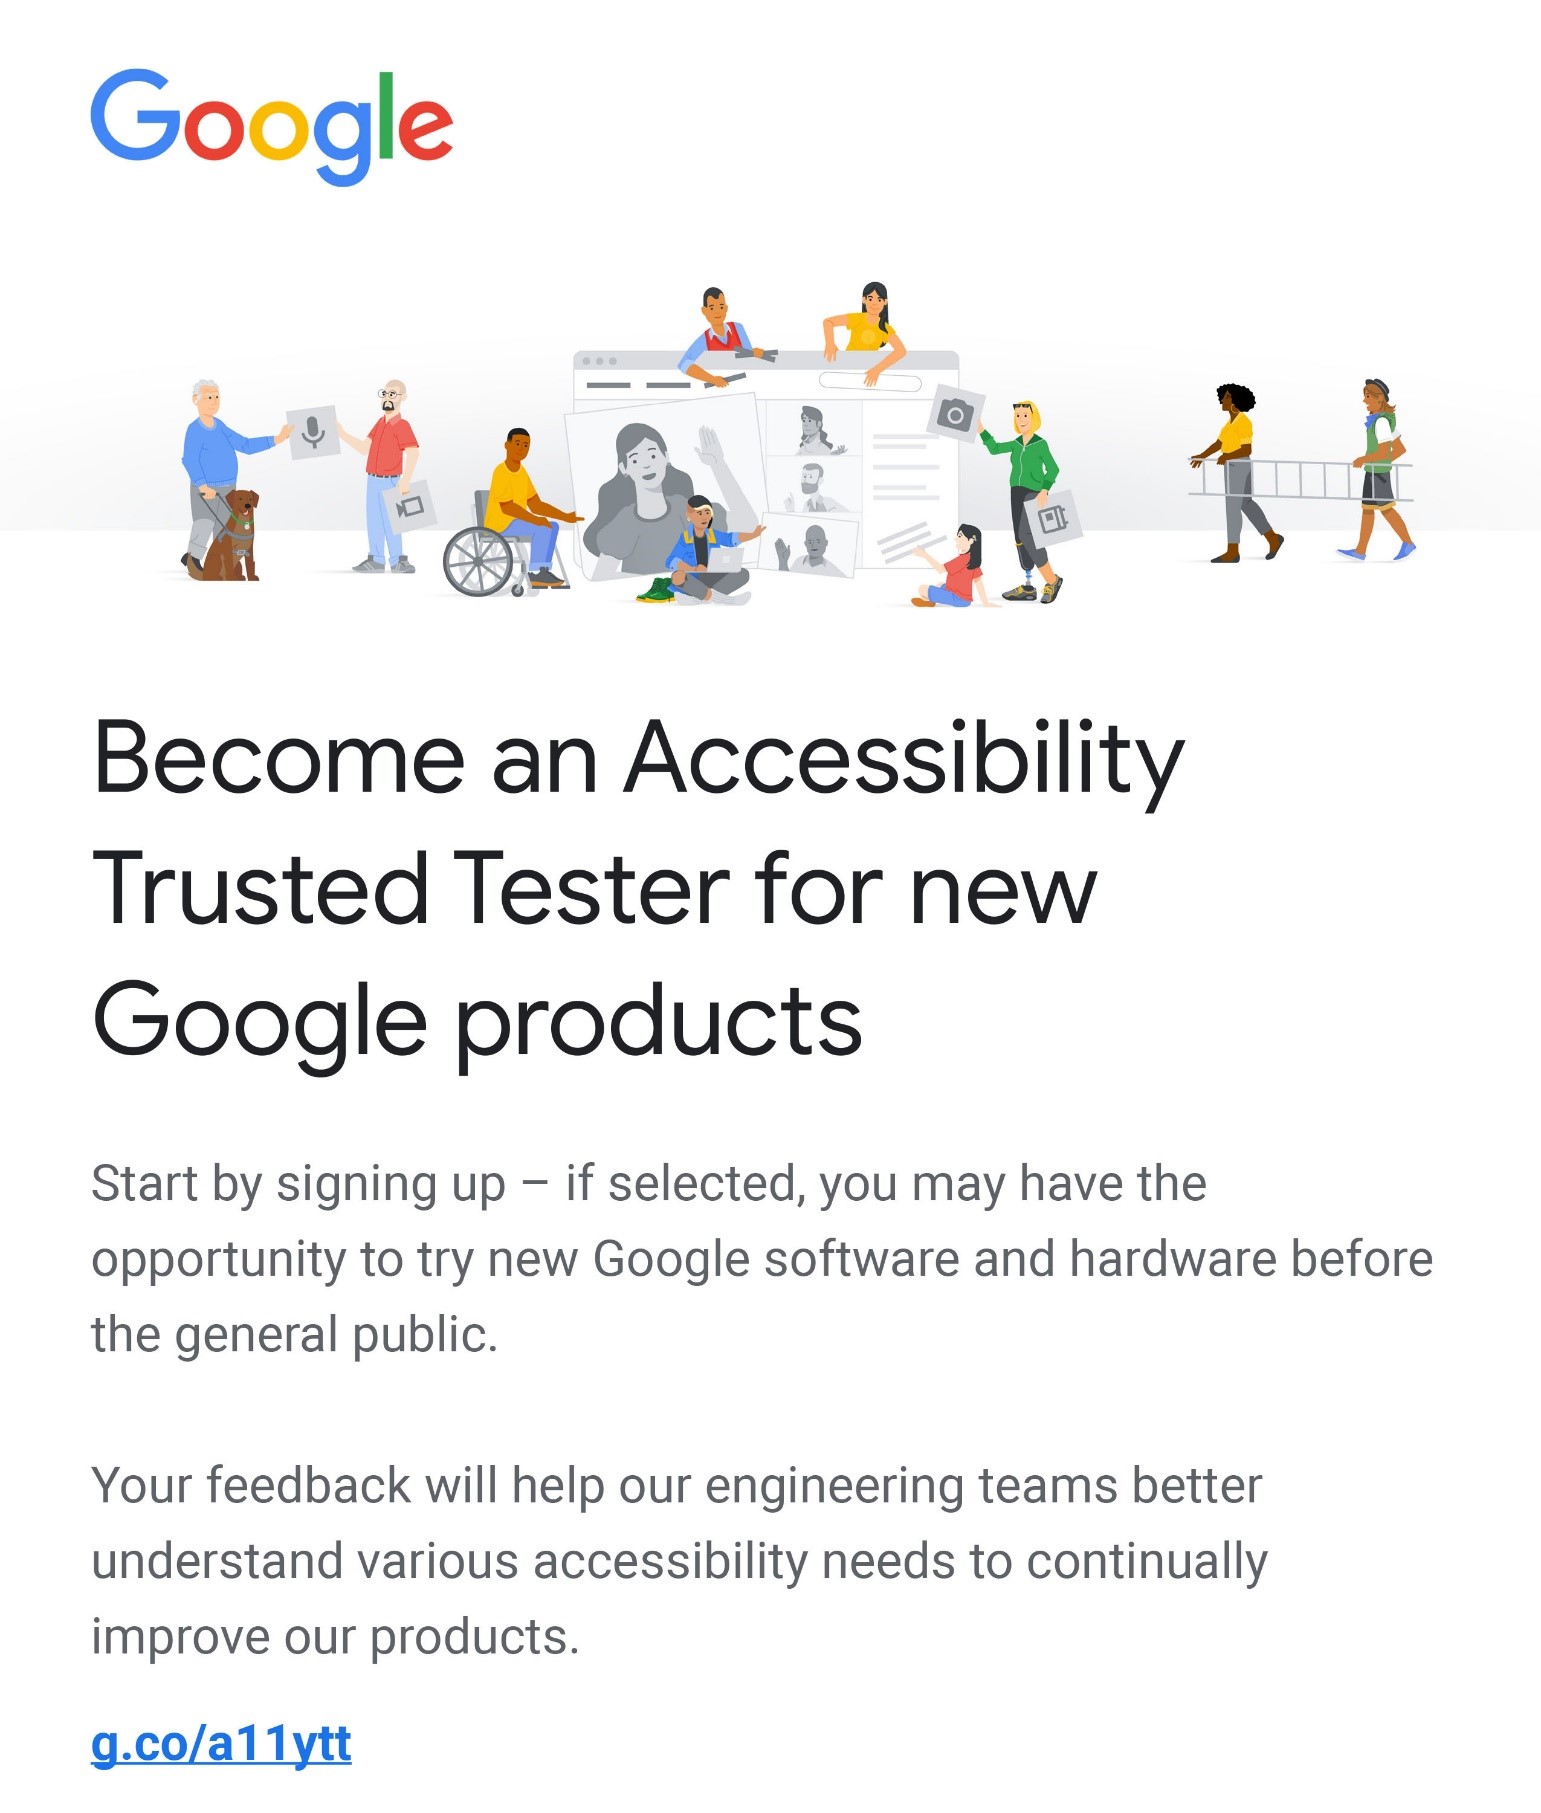 Become an Accessibility Trusted Tester for new Google products. Start by signing up – if selected, you may have the opportunity to try new Google software and hardware before the general public. Your feedback will help our engineering teams better understand various accessibility needs to continually improve our products. g.co/a11ytt